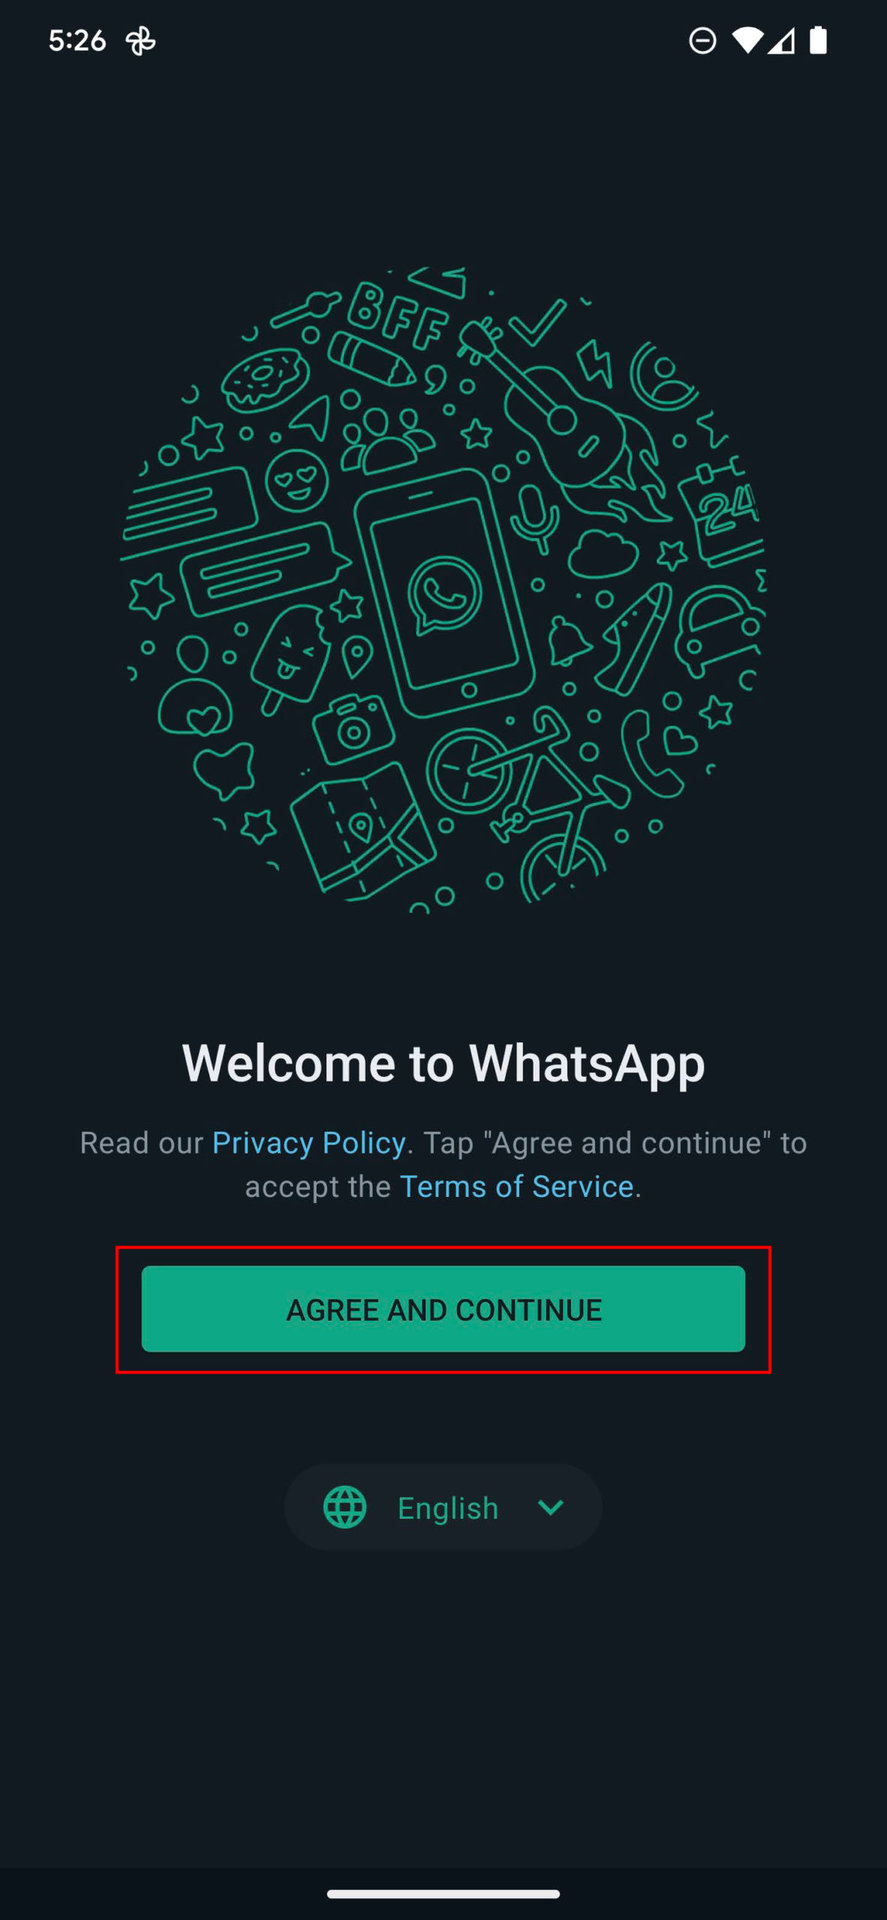 How to use WhatsApp without a SIM using a landline 2